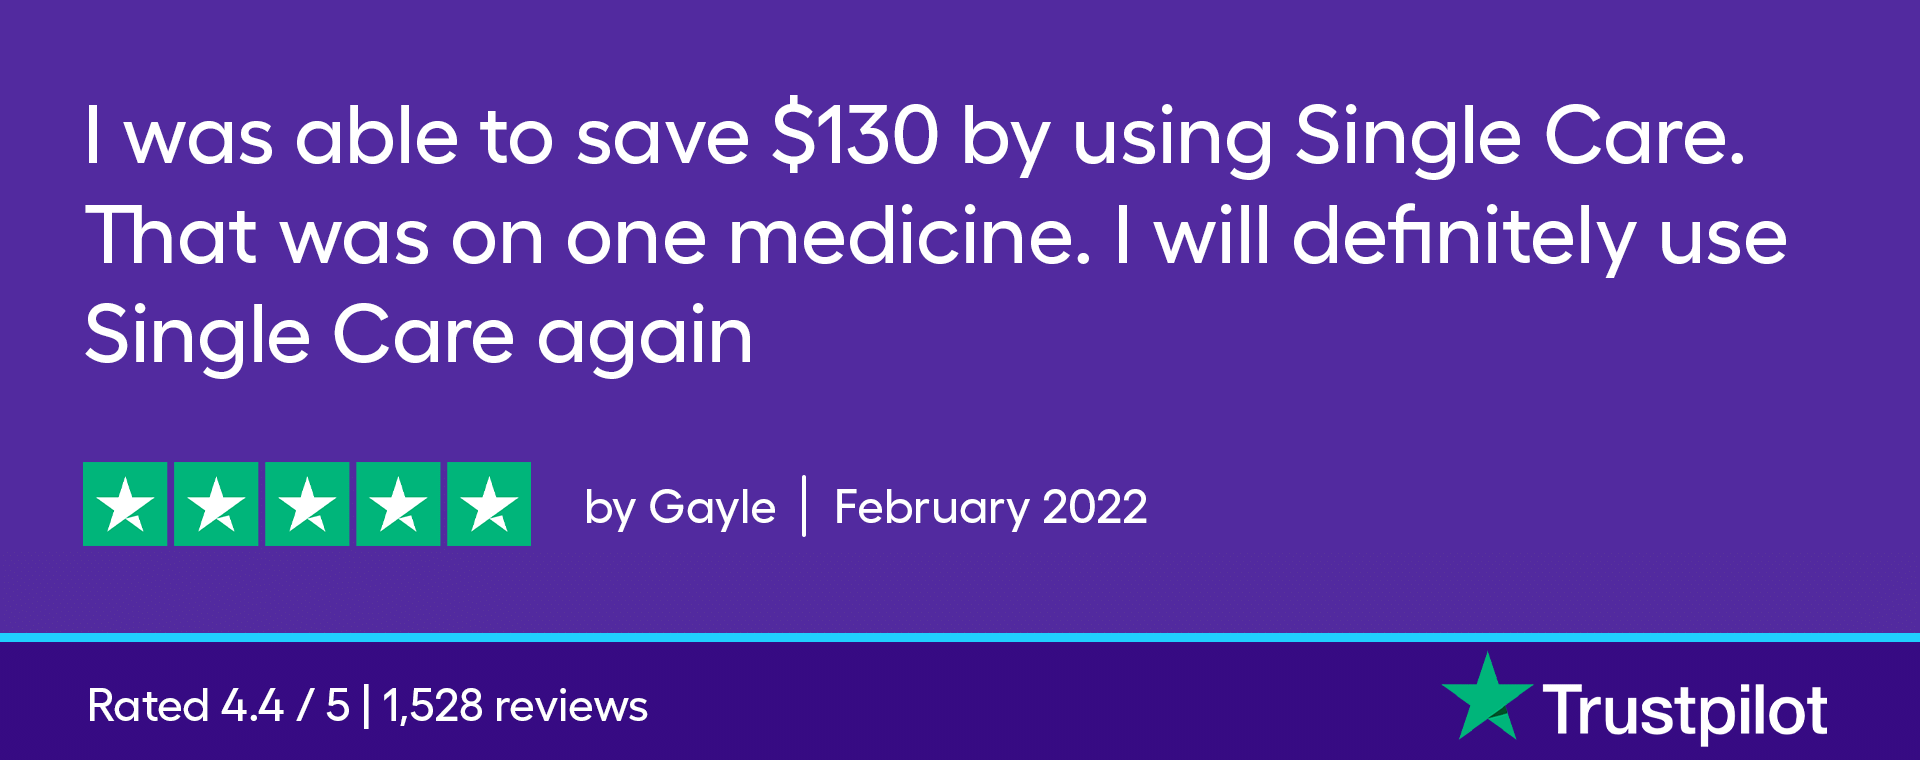 I was able to save $130 by using SingleCare. That was on one medicine. I will definitely use SingleCare again.